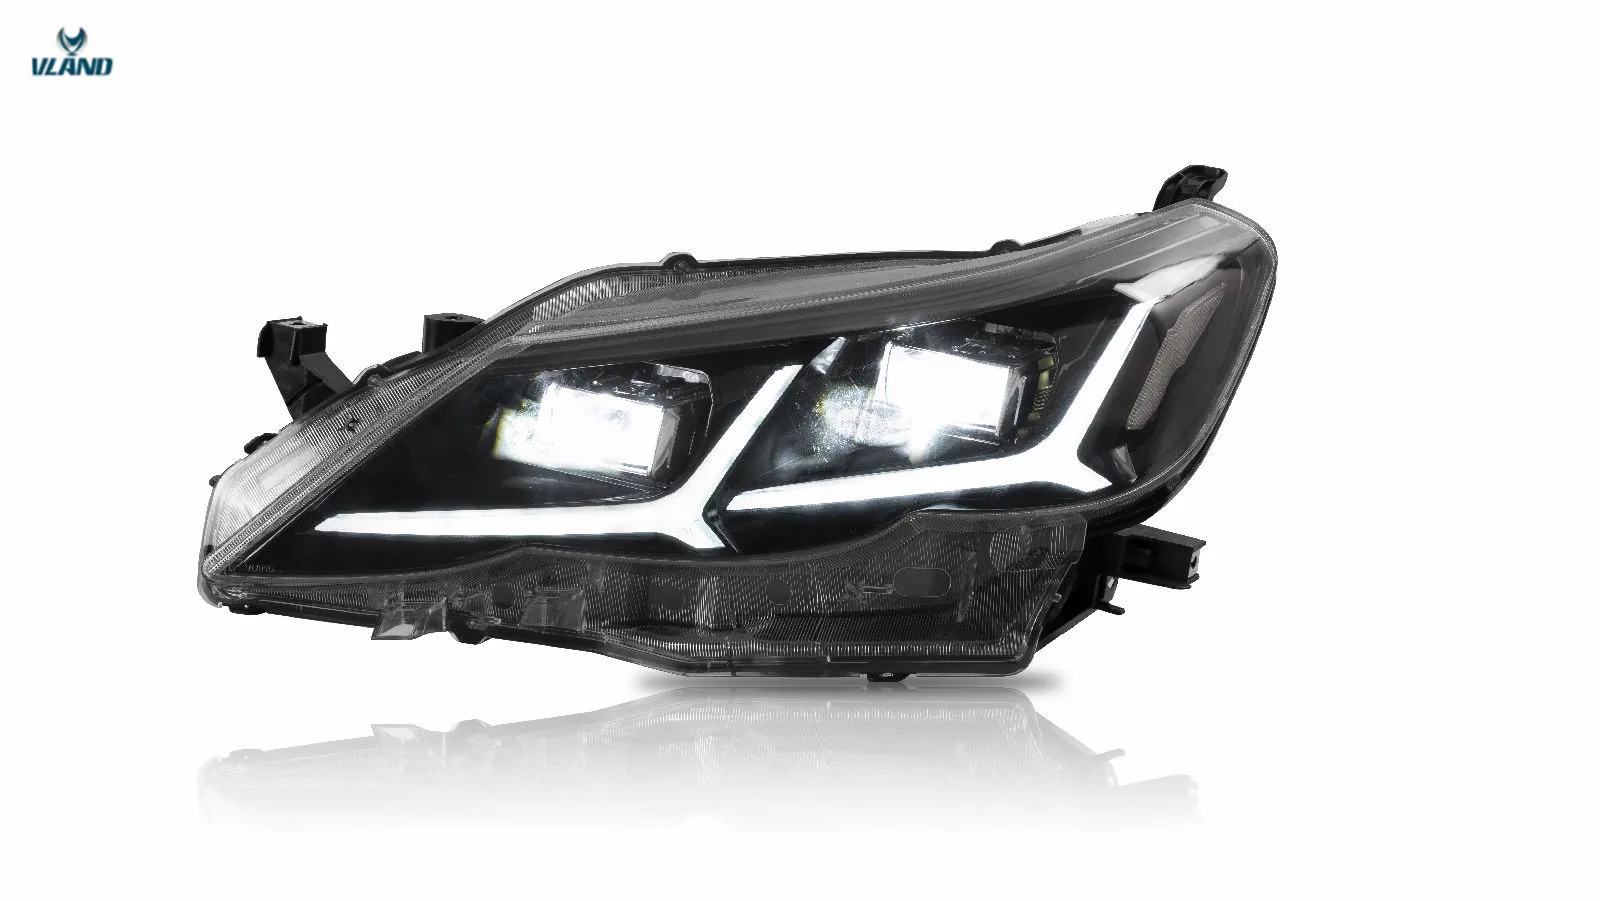 Vland factory accessories for car Reiz full LED headlight 2010-2013 for Mark X head lamp with DRL+welcome light with blue